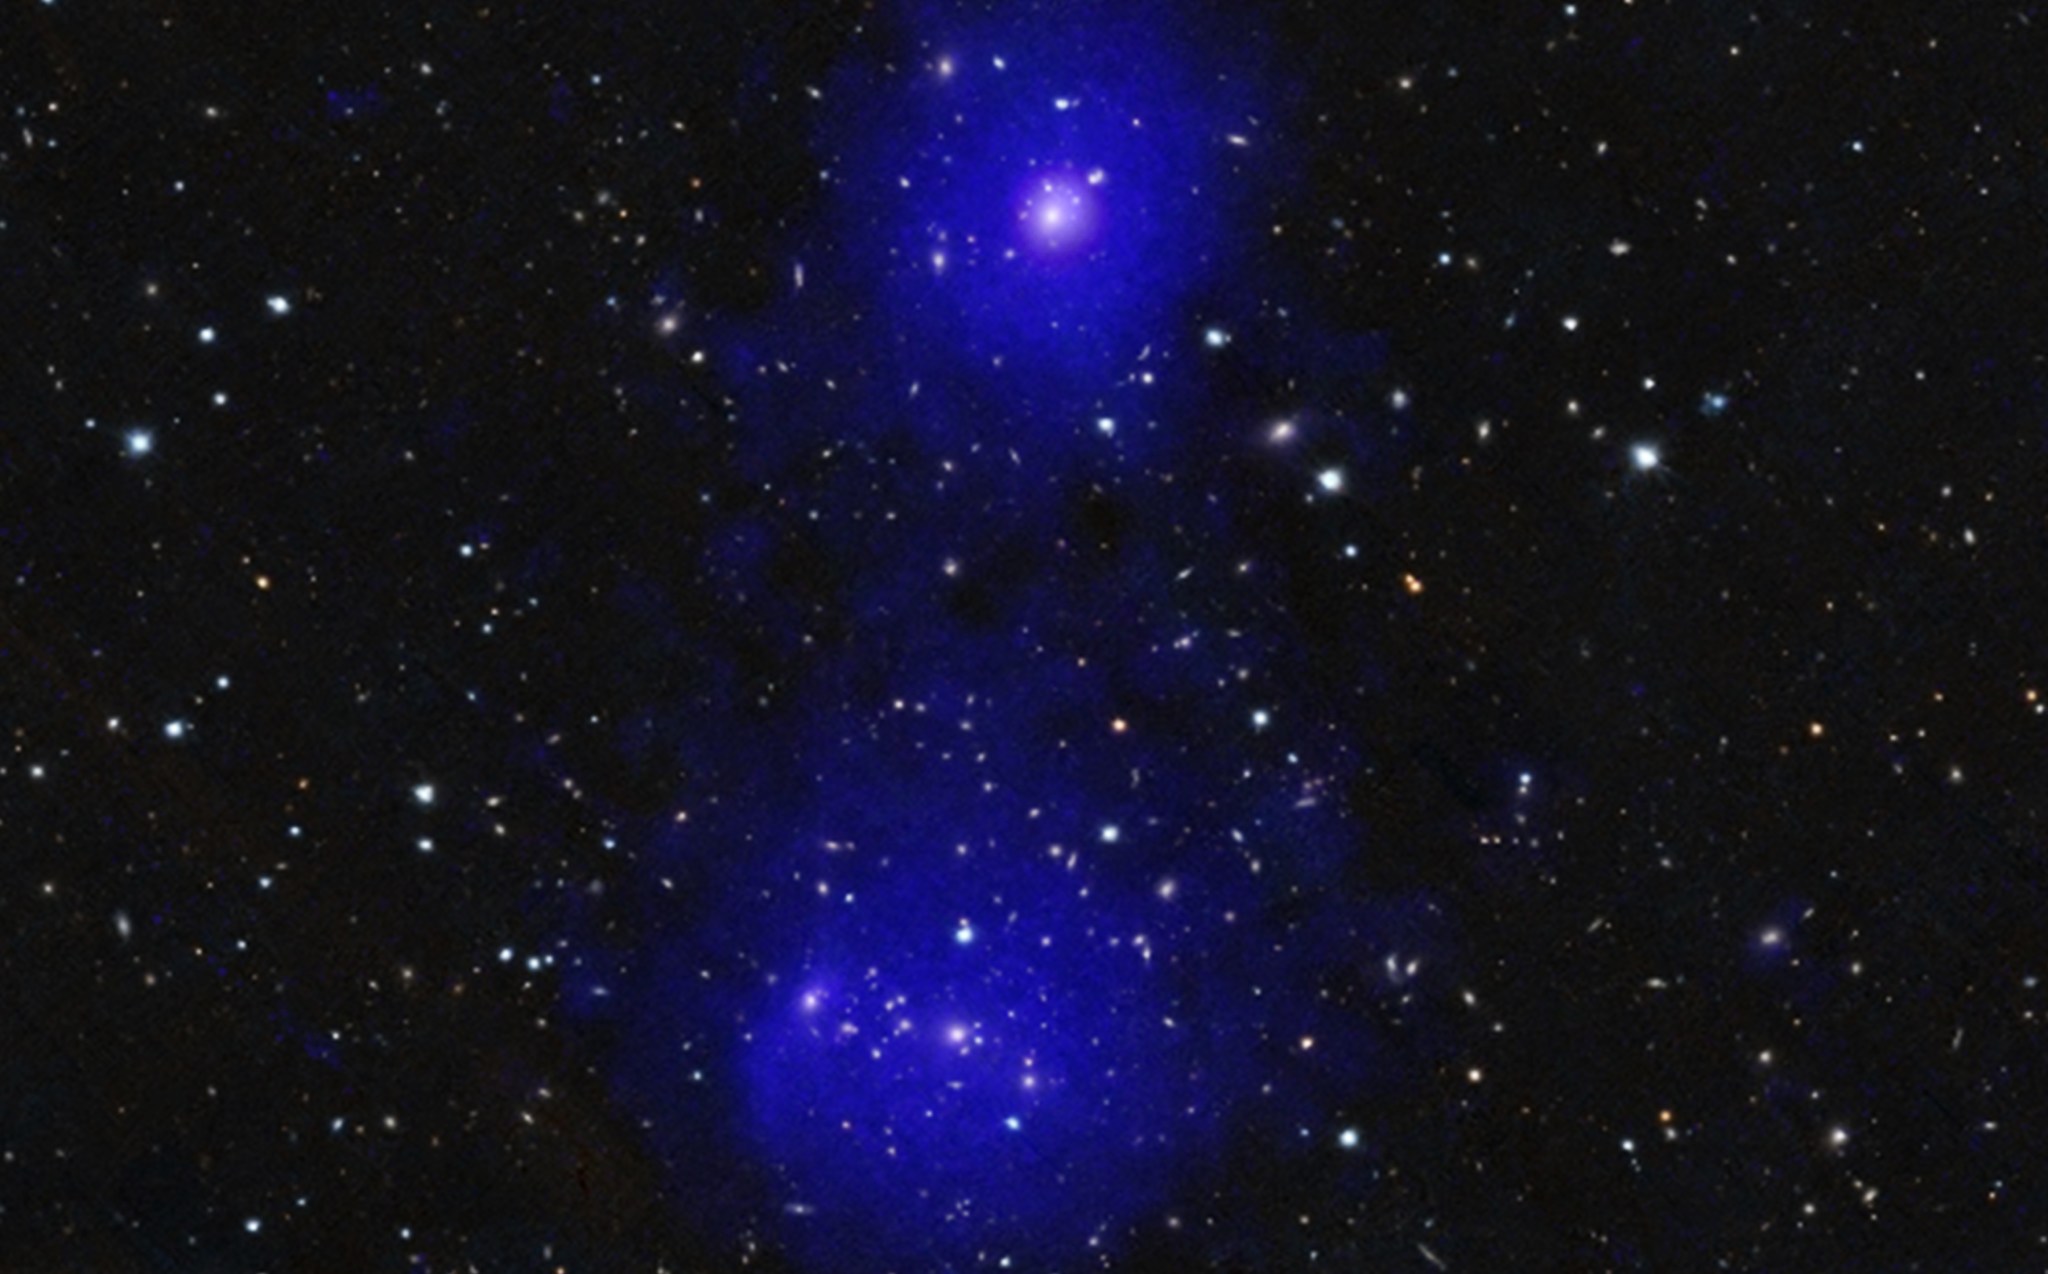 Abell 98 is a system of galaxy clusters in the early stages of a collision.